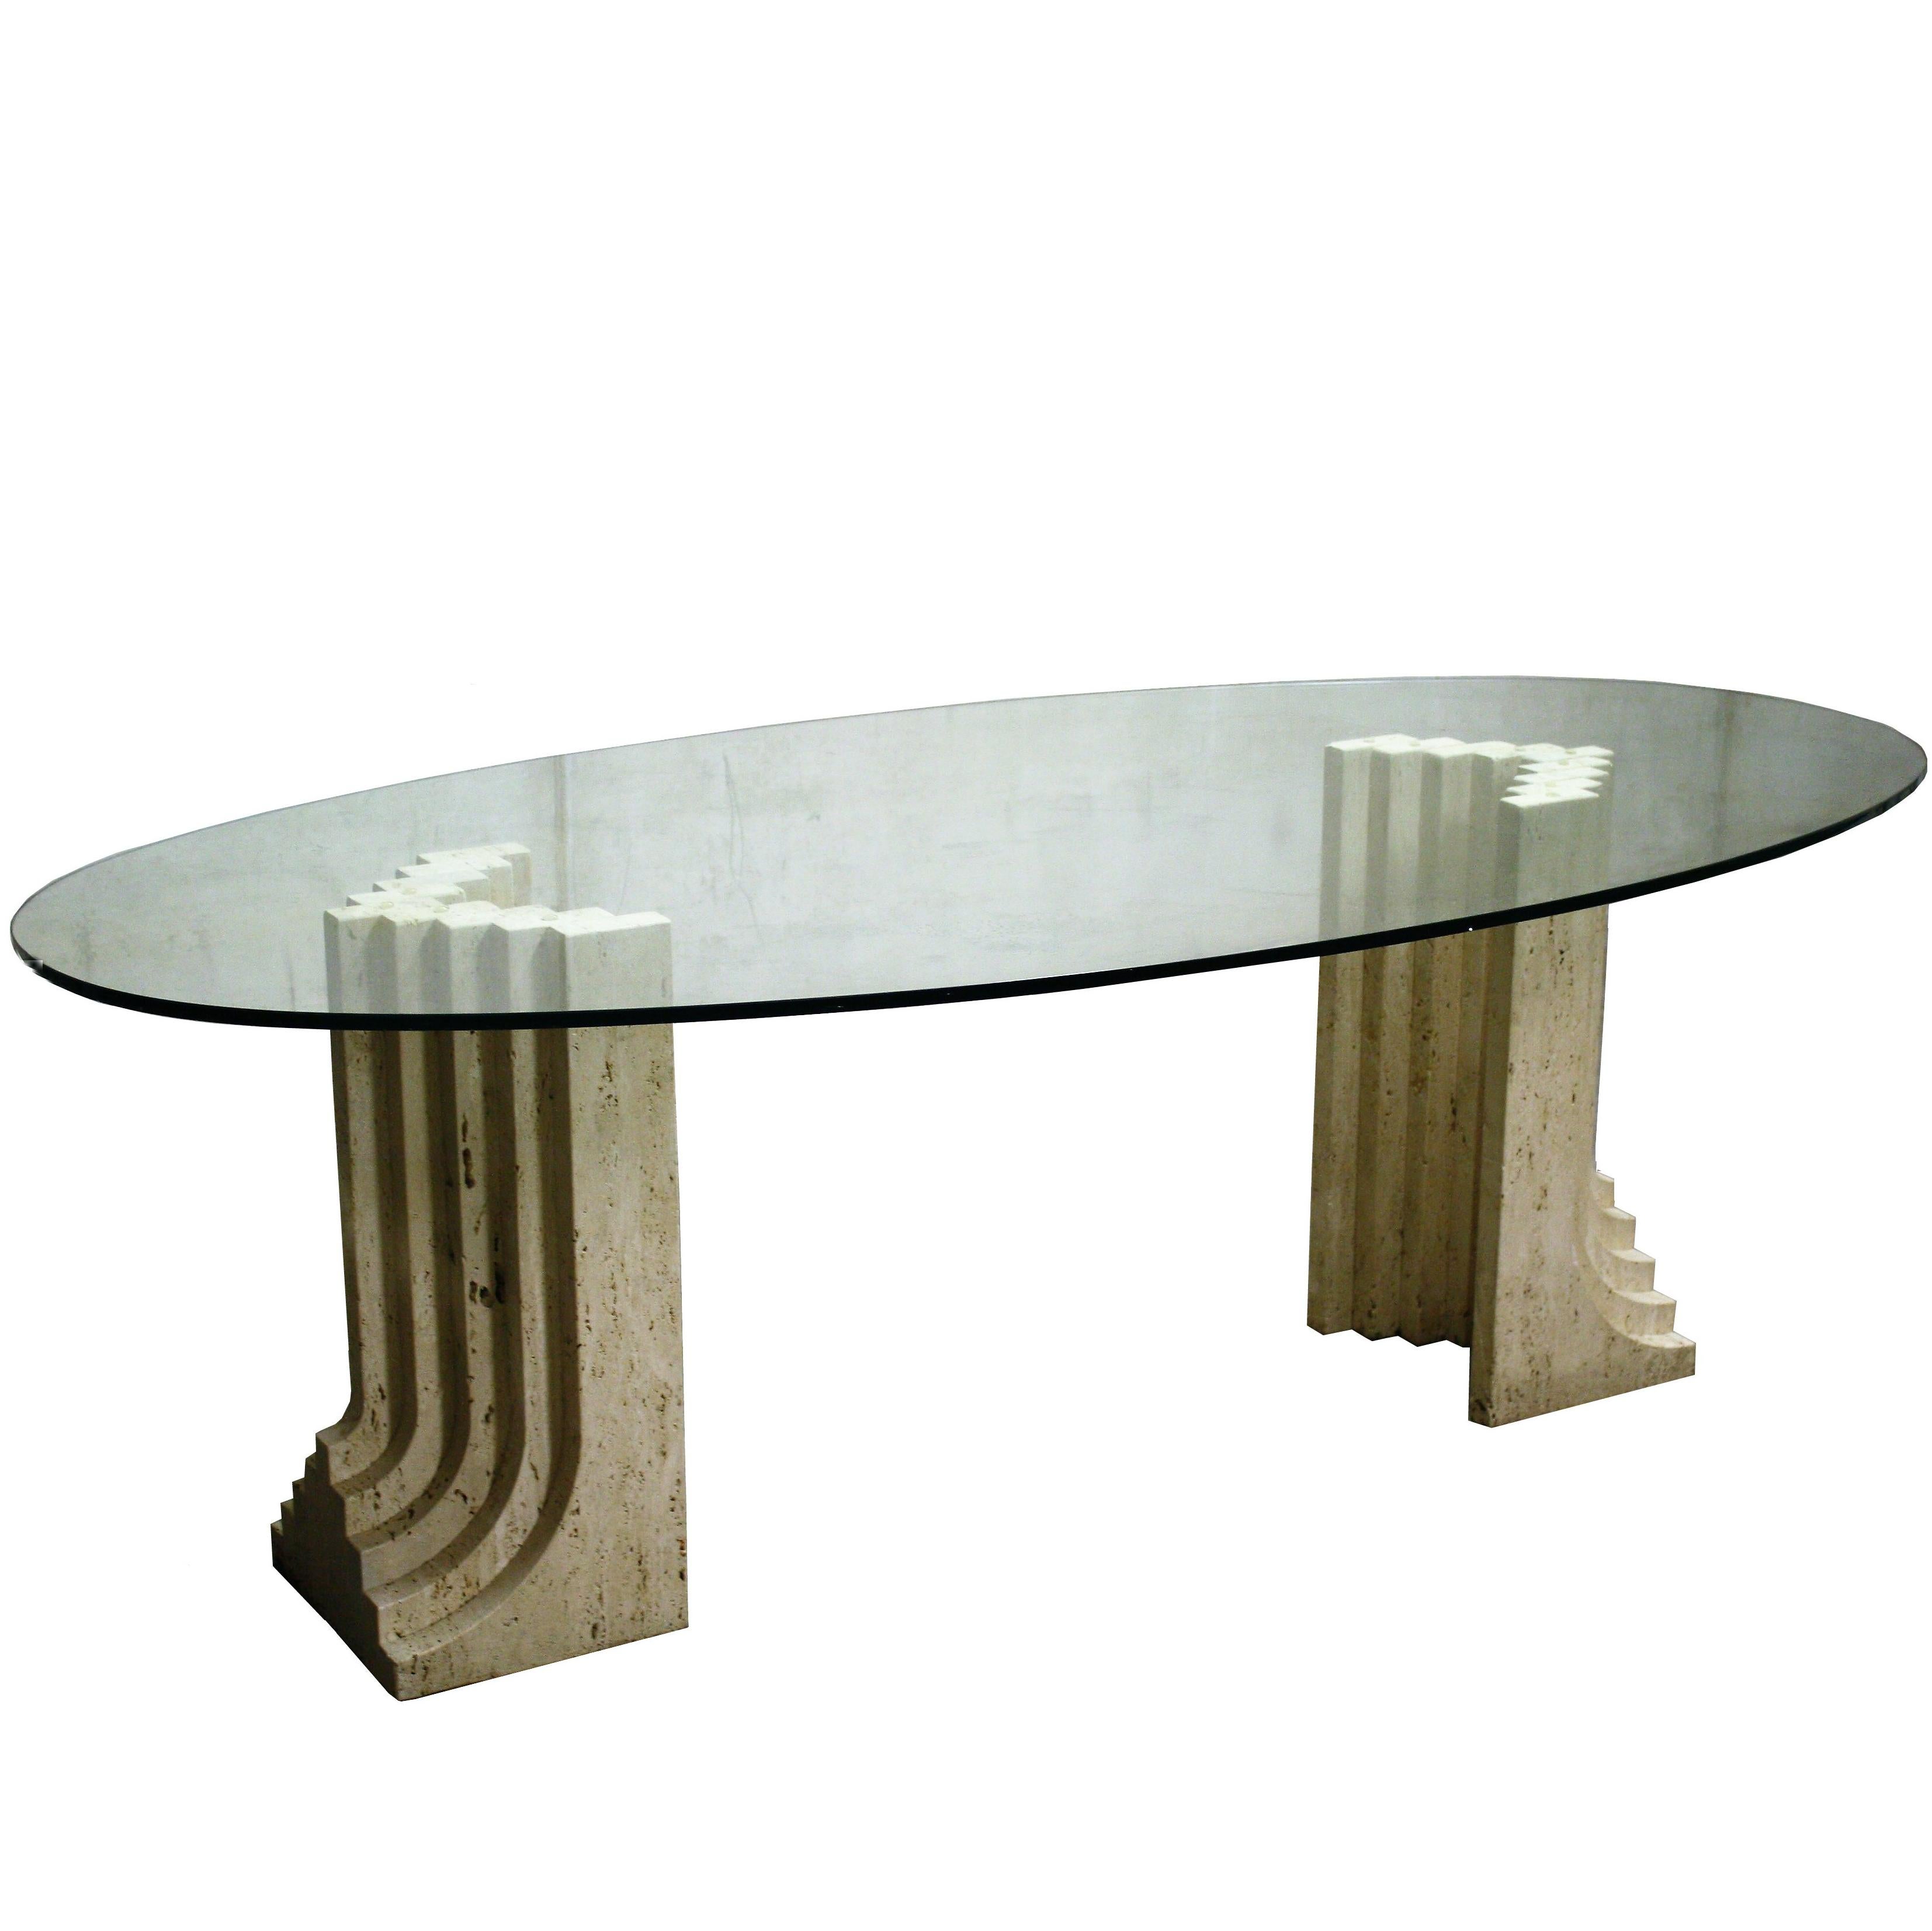 Vintage Travertine Oval Dining Table by Studio Simon Italy, 1980s